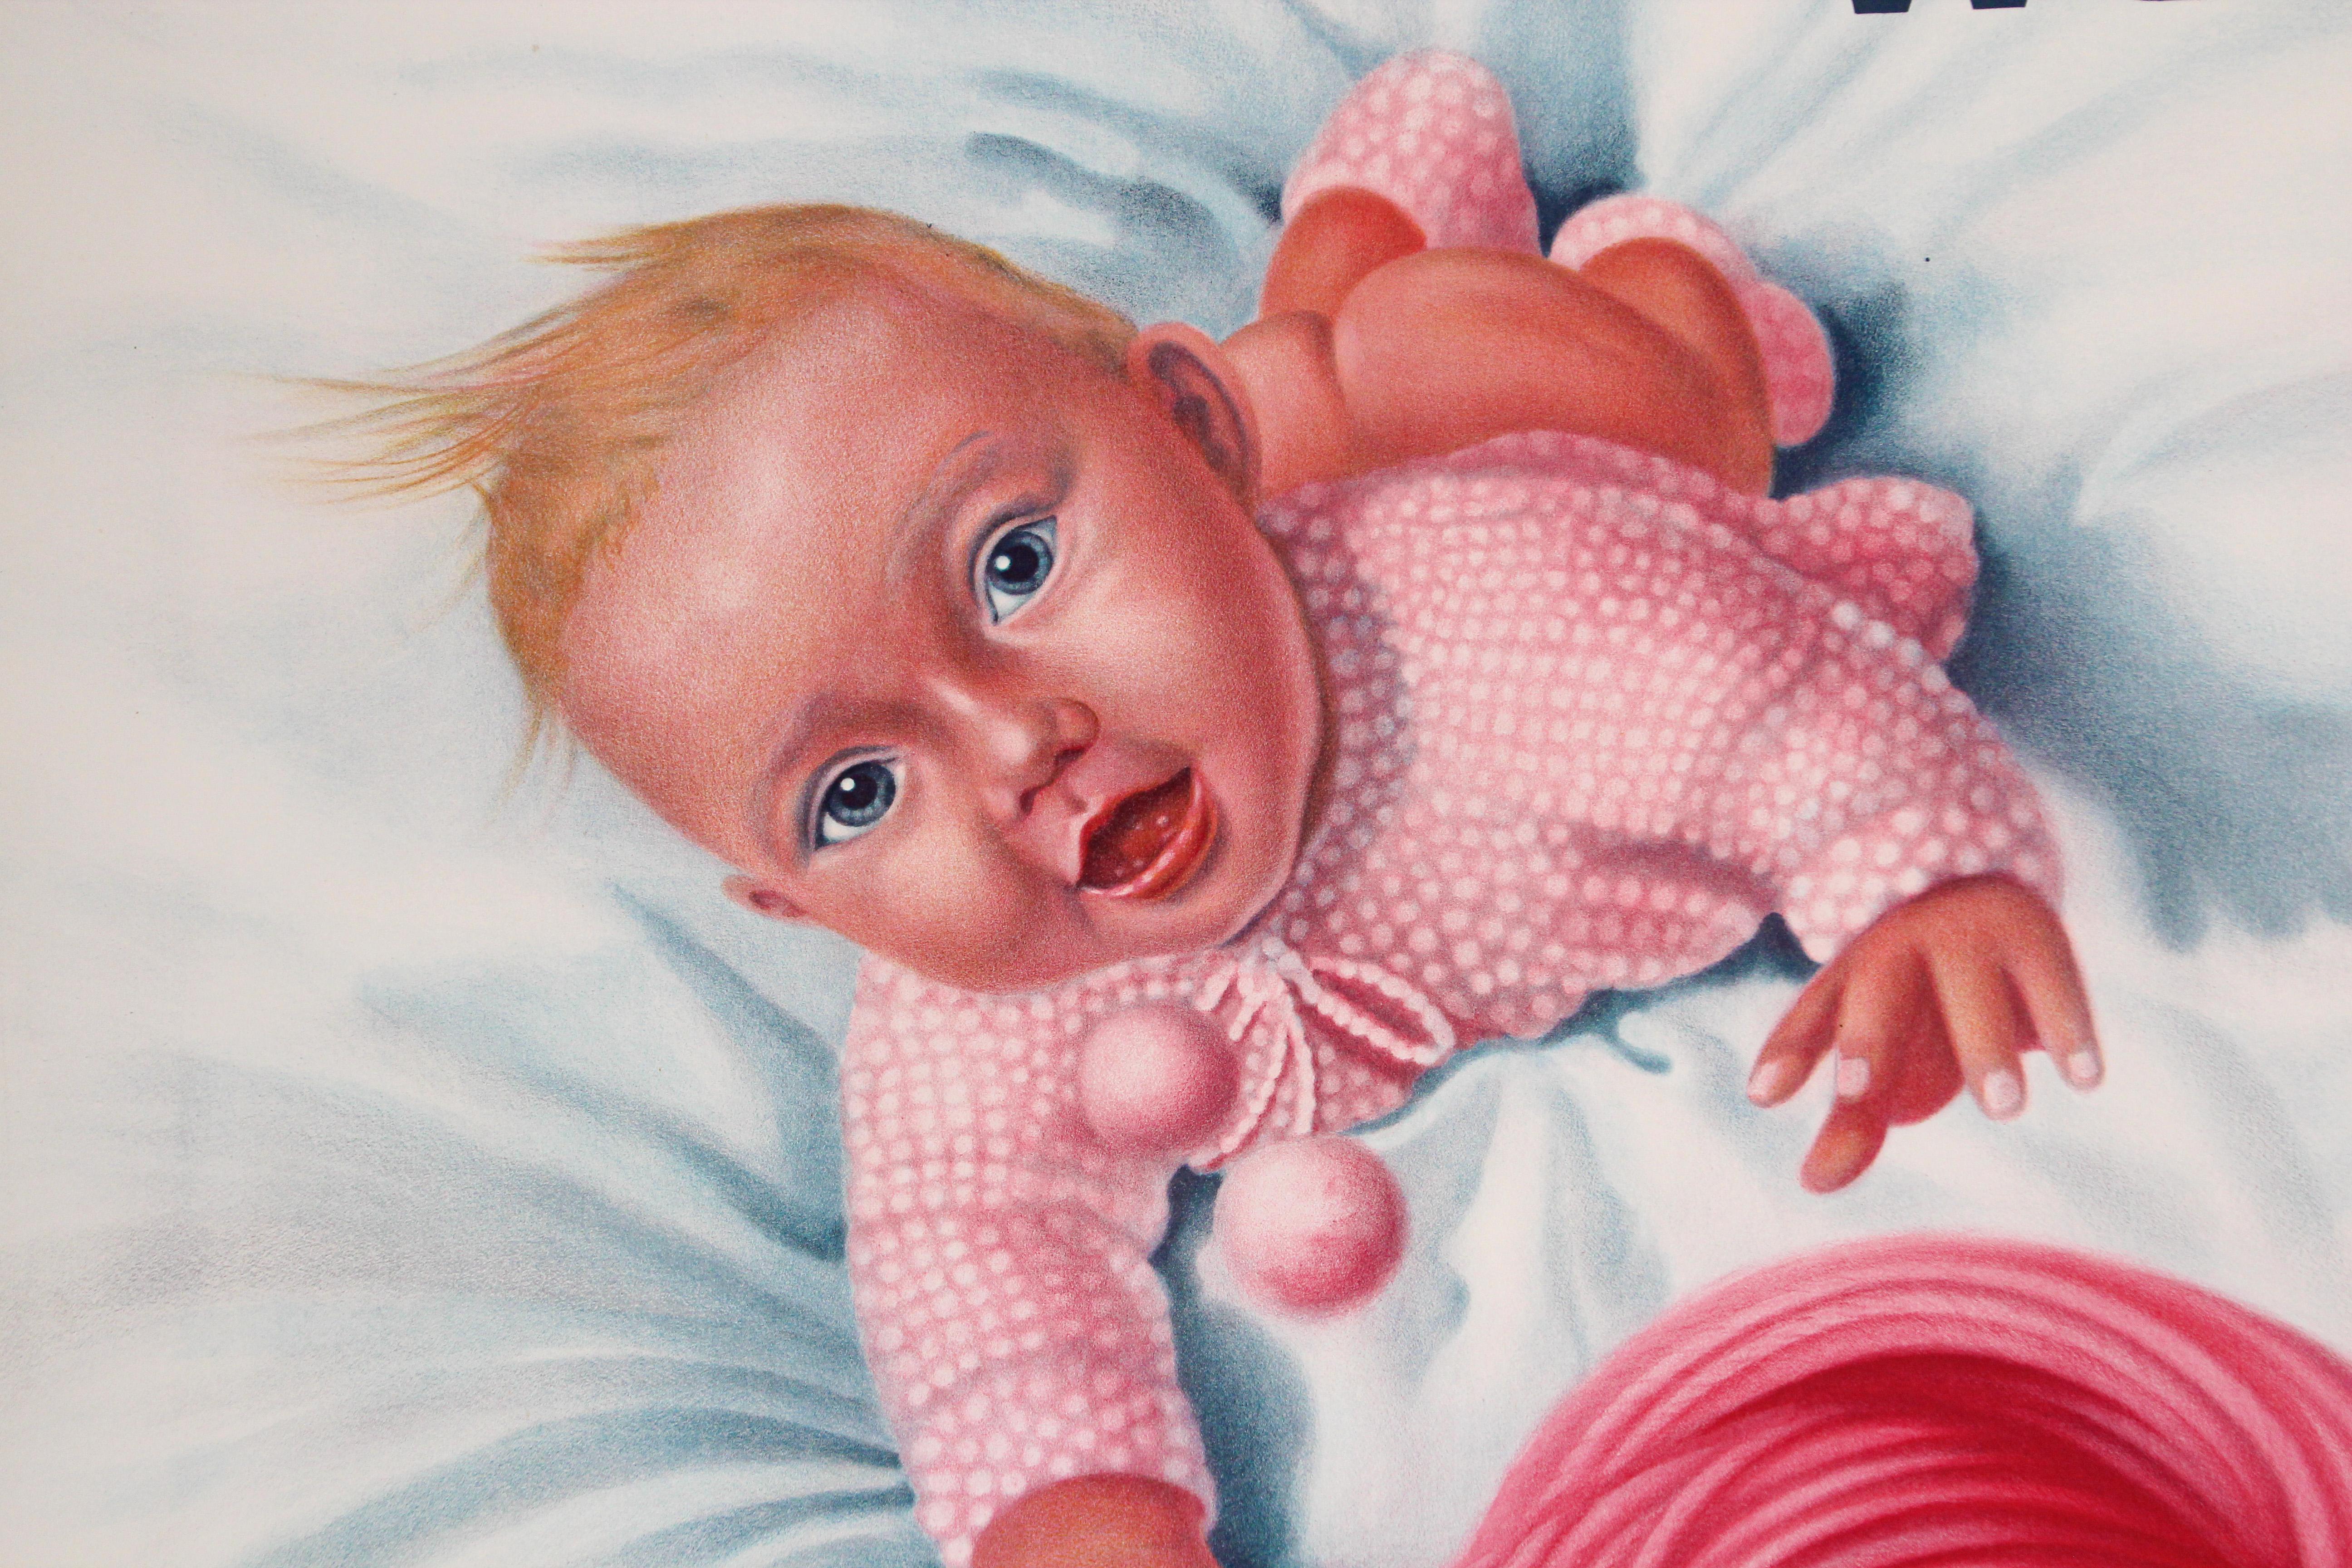 Vintage Poster Swiss Schaffhauser Wolle Wool Yarn Knitting 1935 Baby in Pink For Sale 2